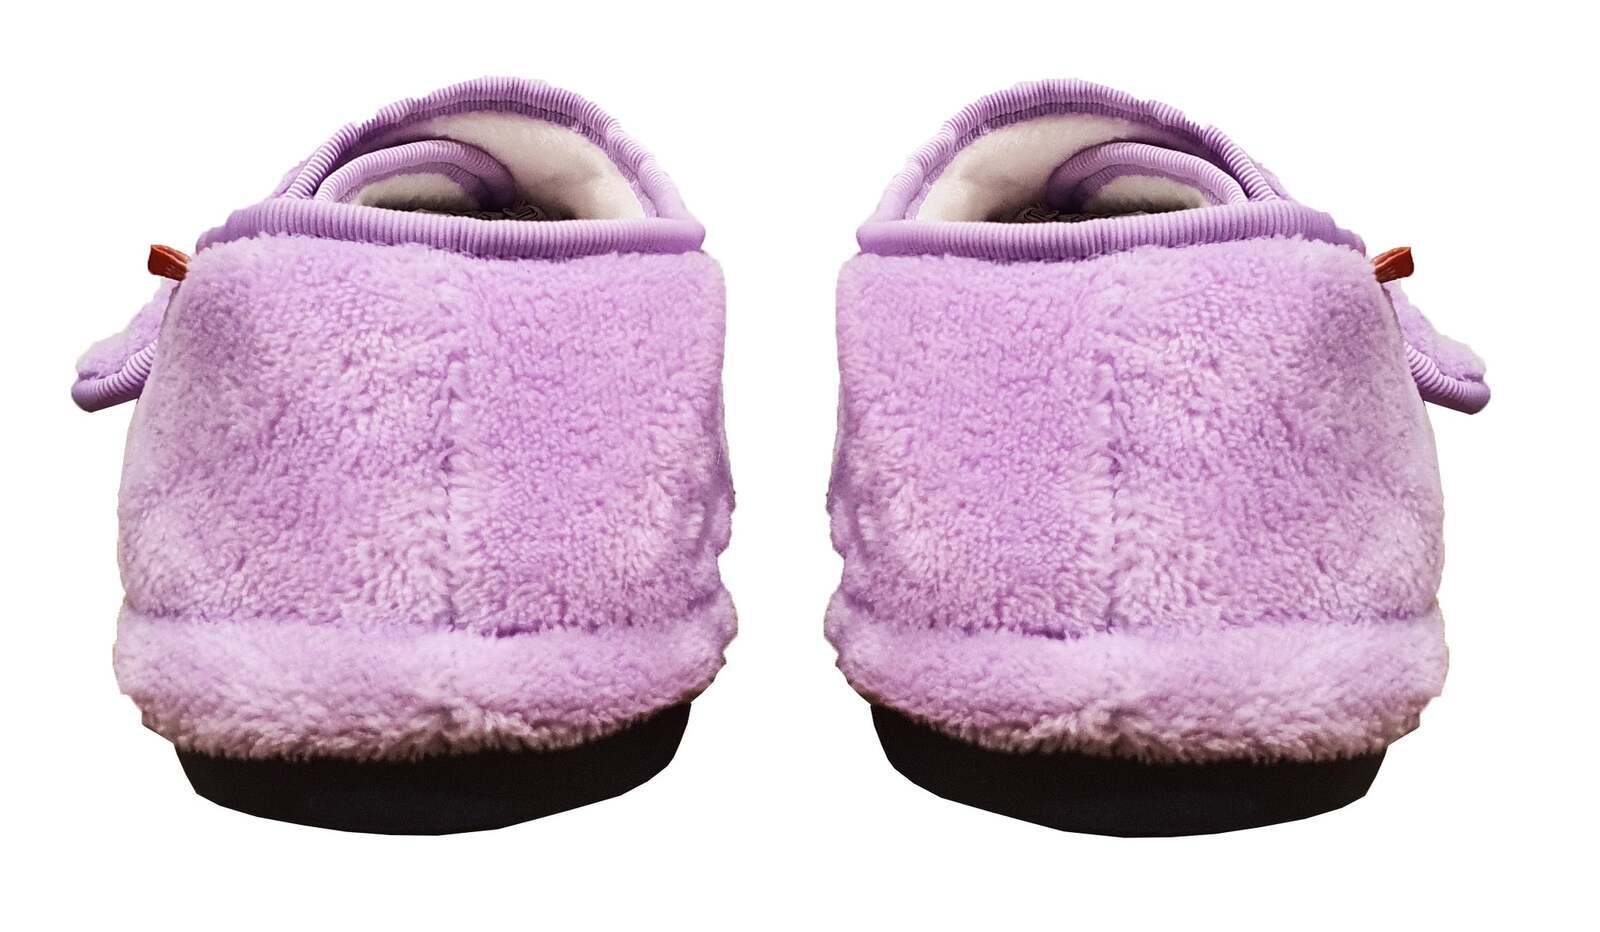 ARCHLINE Orthotic Plus Slippers Closed Scuffs Pain Relief Moccasins - Lilac - EU 39